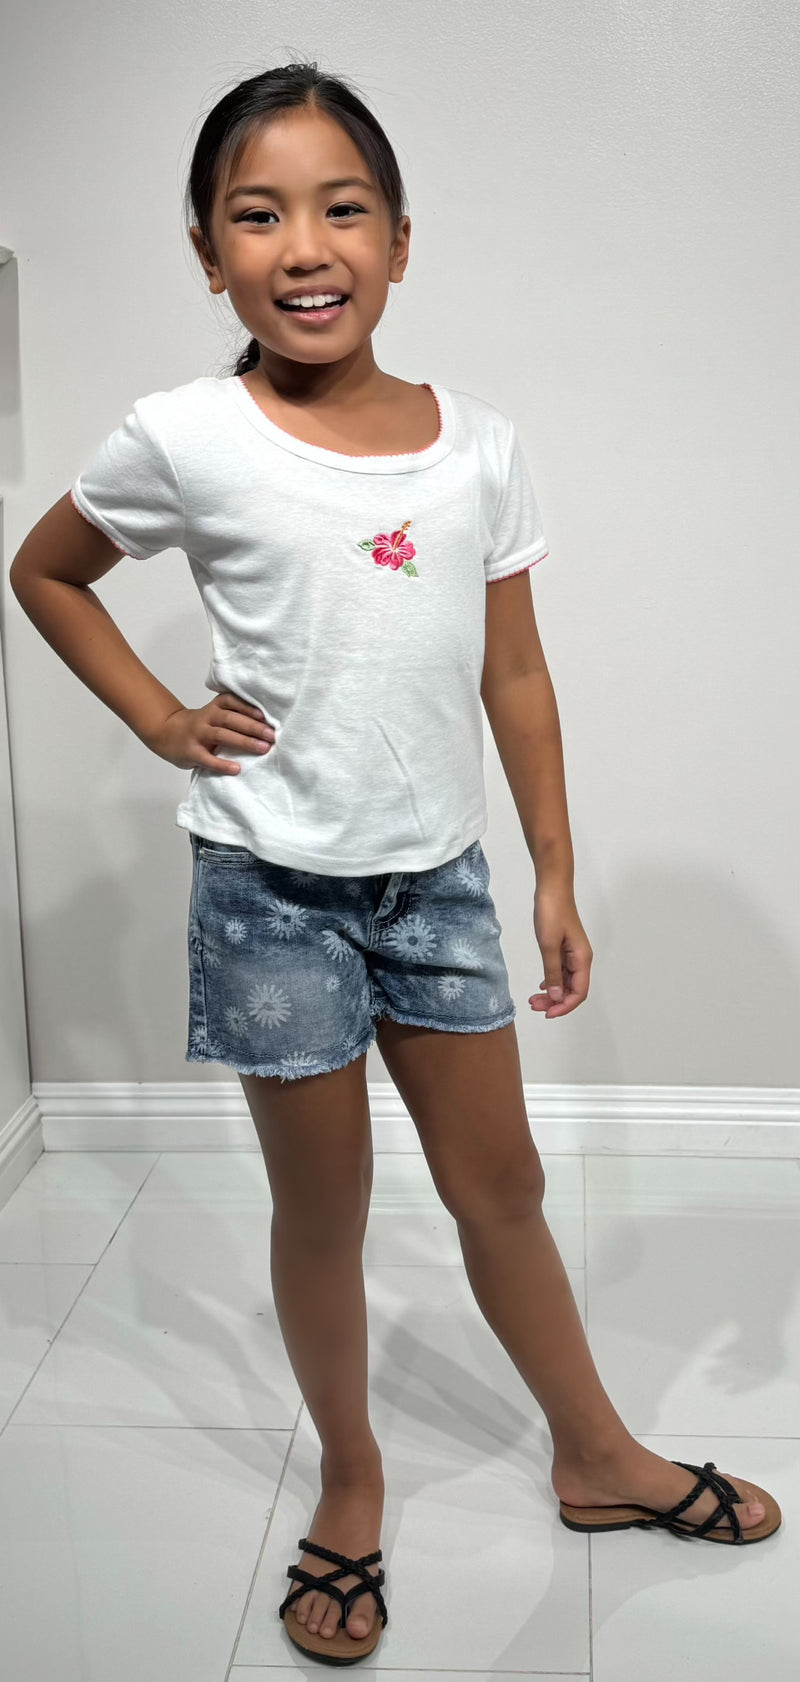 Jeans Warehouse Hawaii - S/S PRINT 7-16 - LOCAL GIRL THINGS TOP | KIDS SIZE 7-16 | By IKEDDI IMPORTS